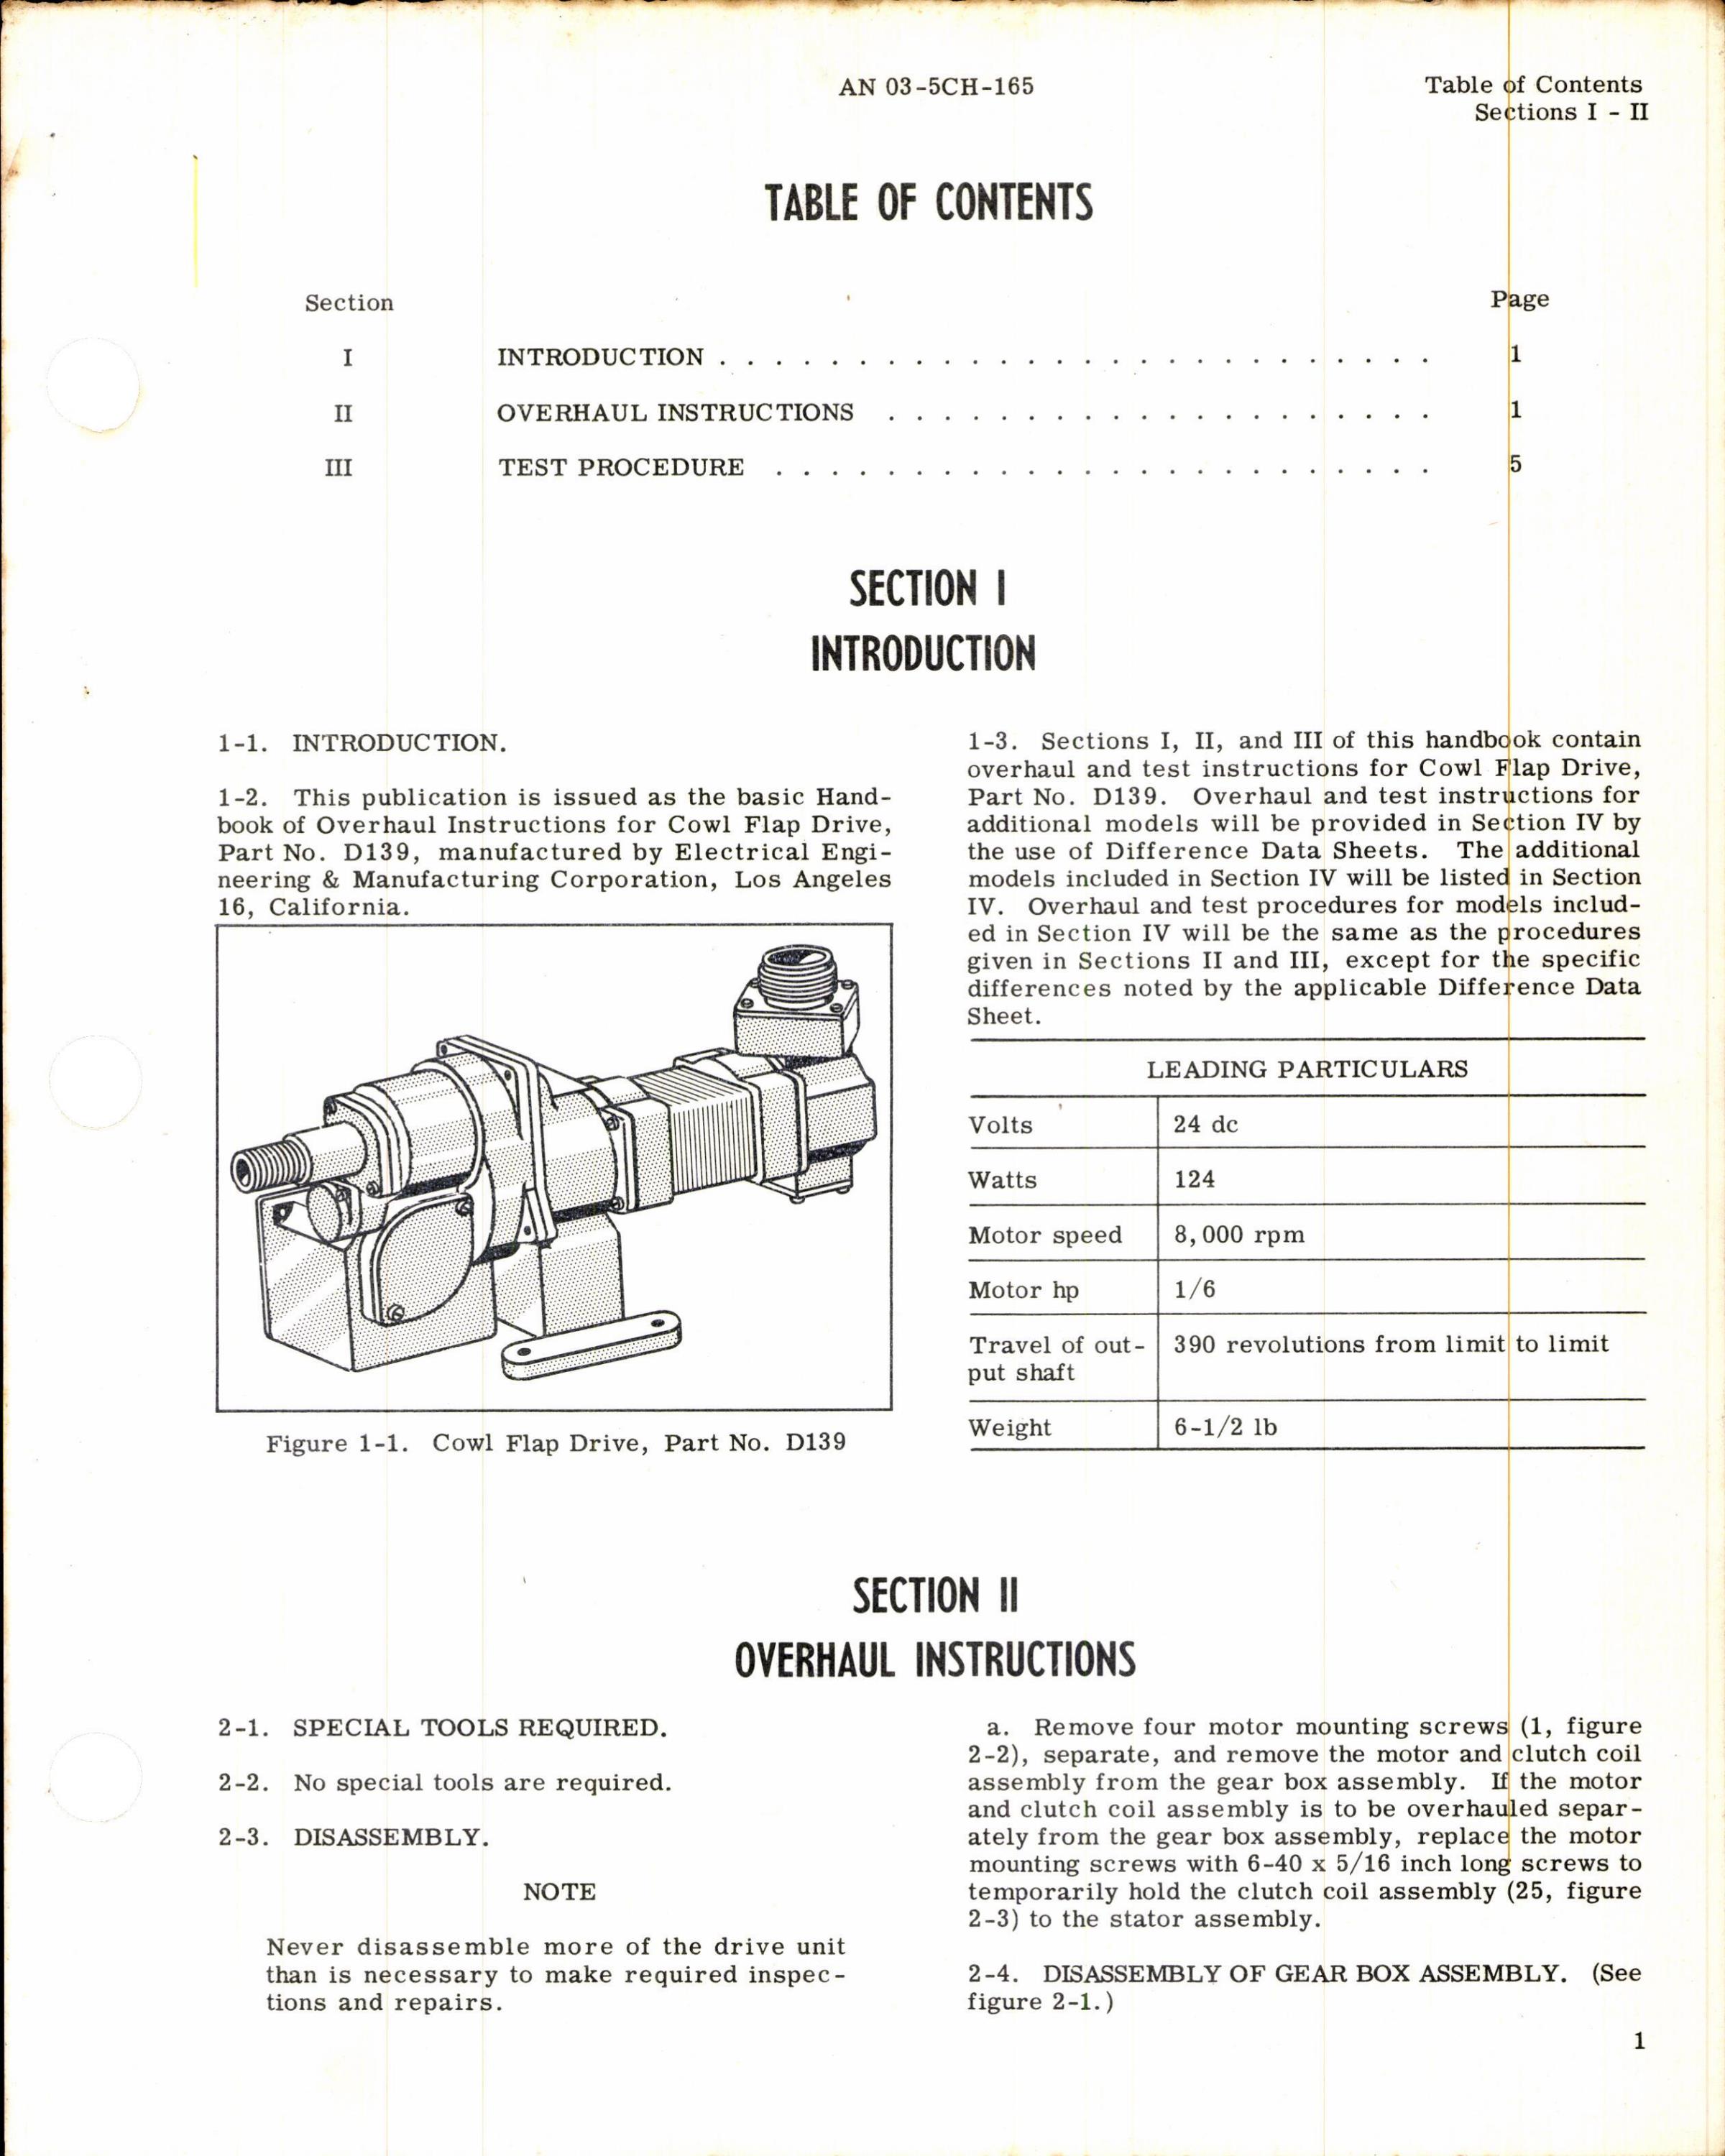 Sample page 3 from AirCorps Library document: Overhaul Instructions for Cowl Flap Drive Part No D139